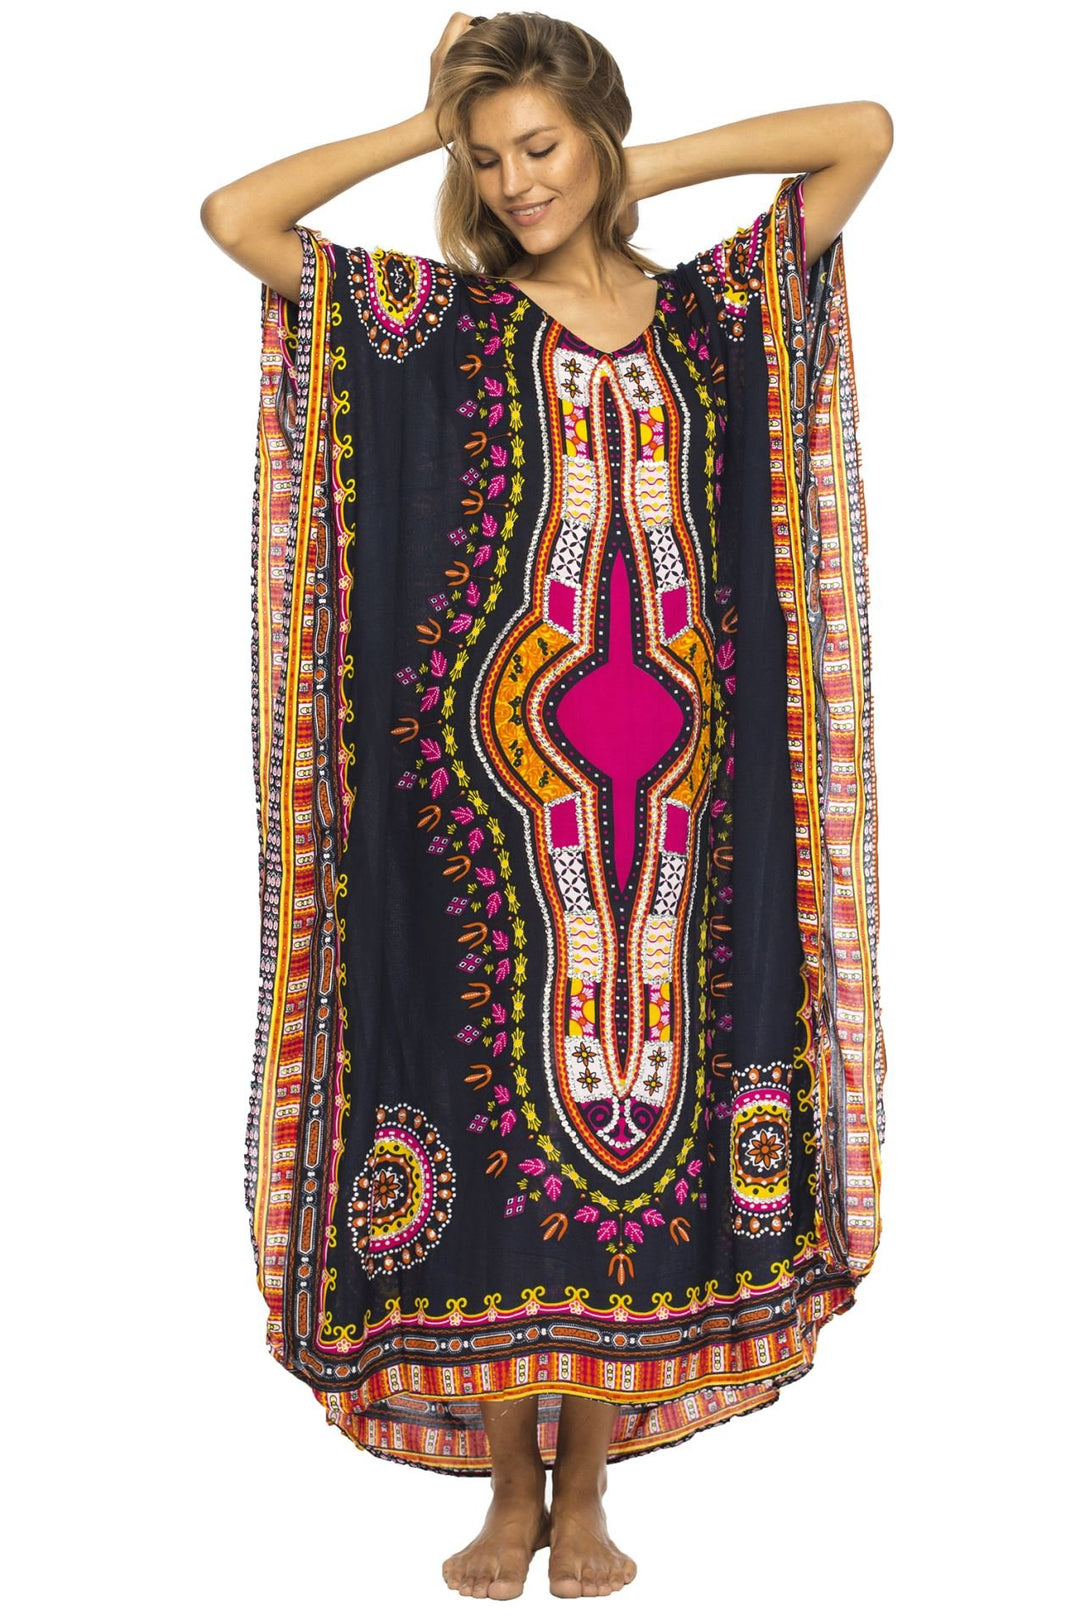 Back From Bali Womens Long Maxi Swimsuit Beach Cover Up African Caftan Patterns